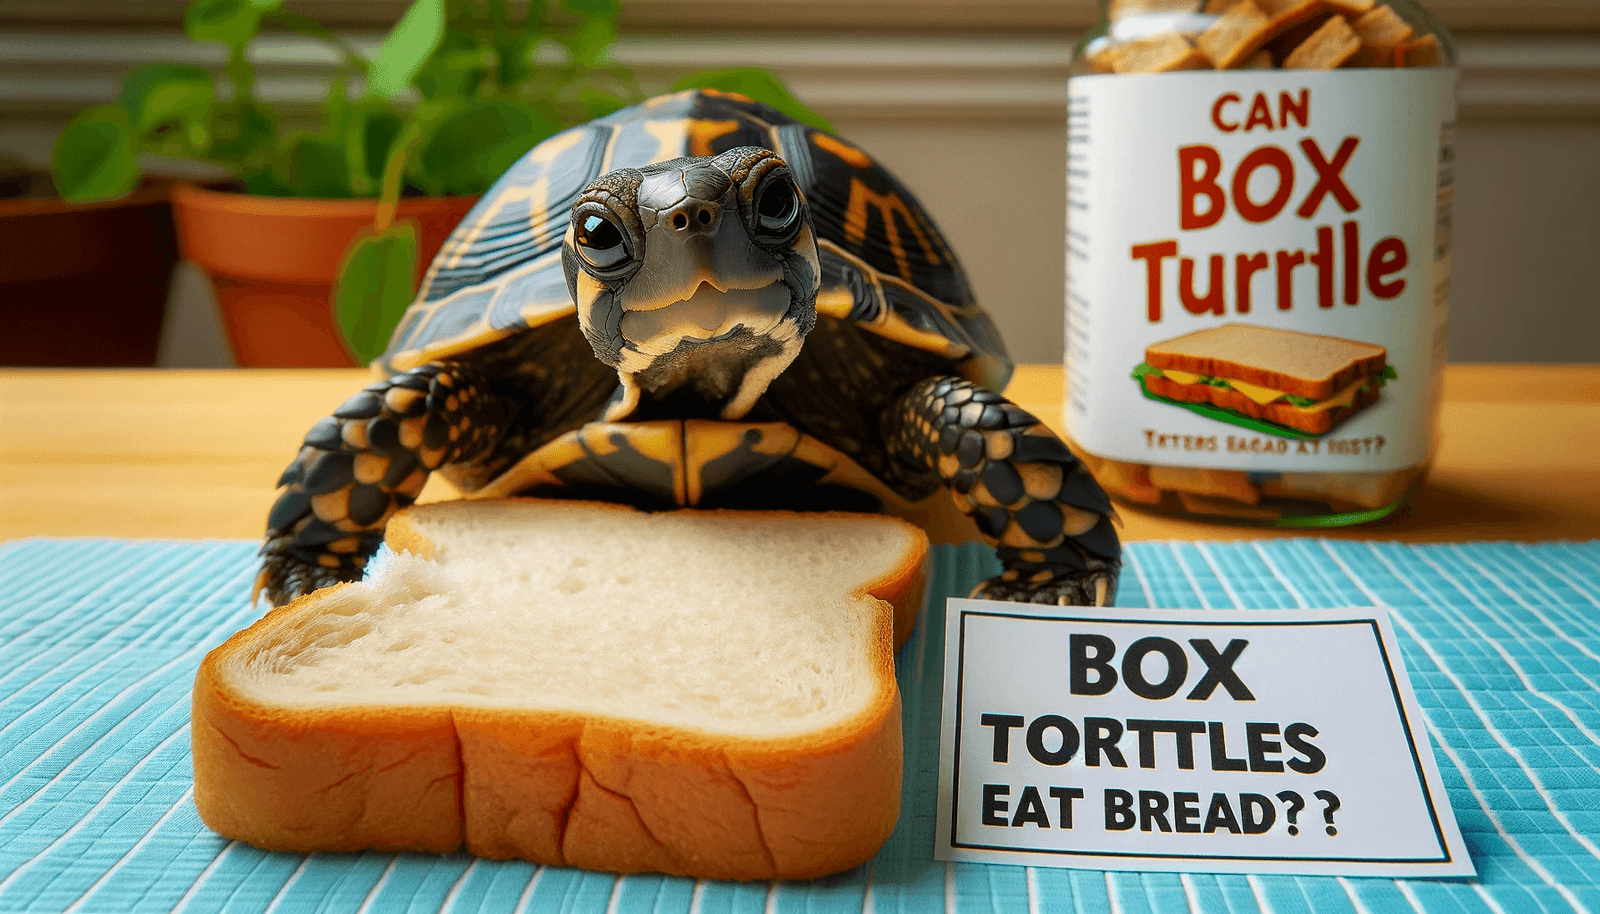 Can Box Turtles Eat Bread